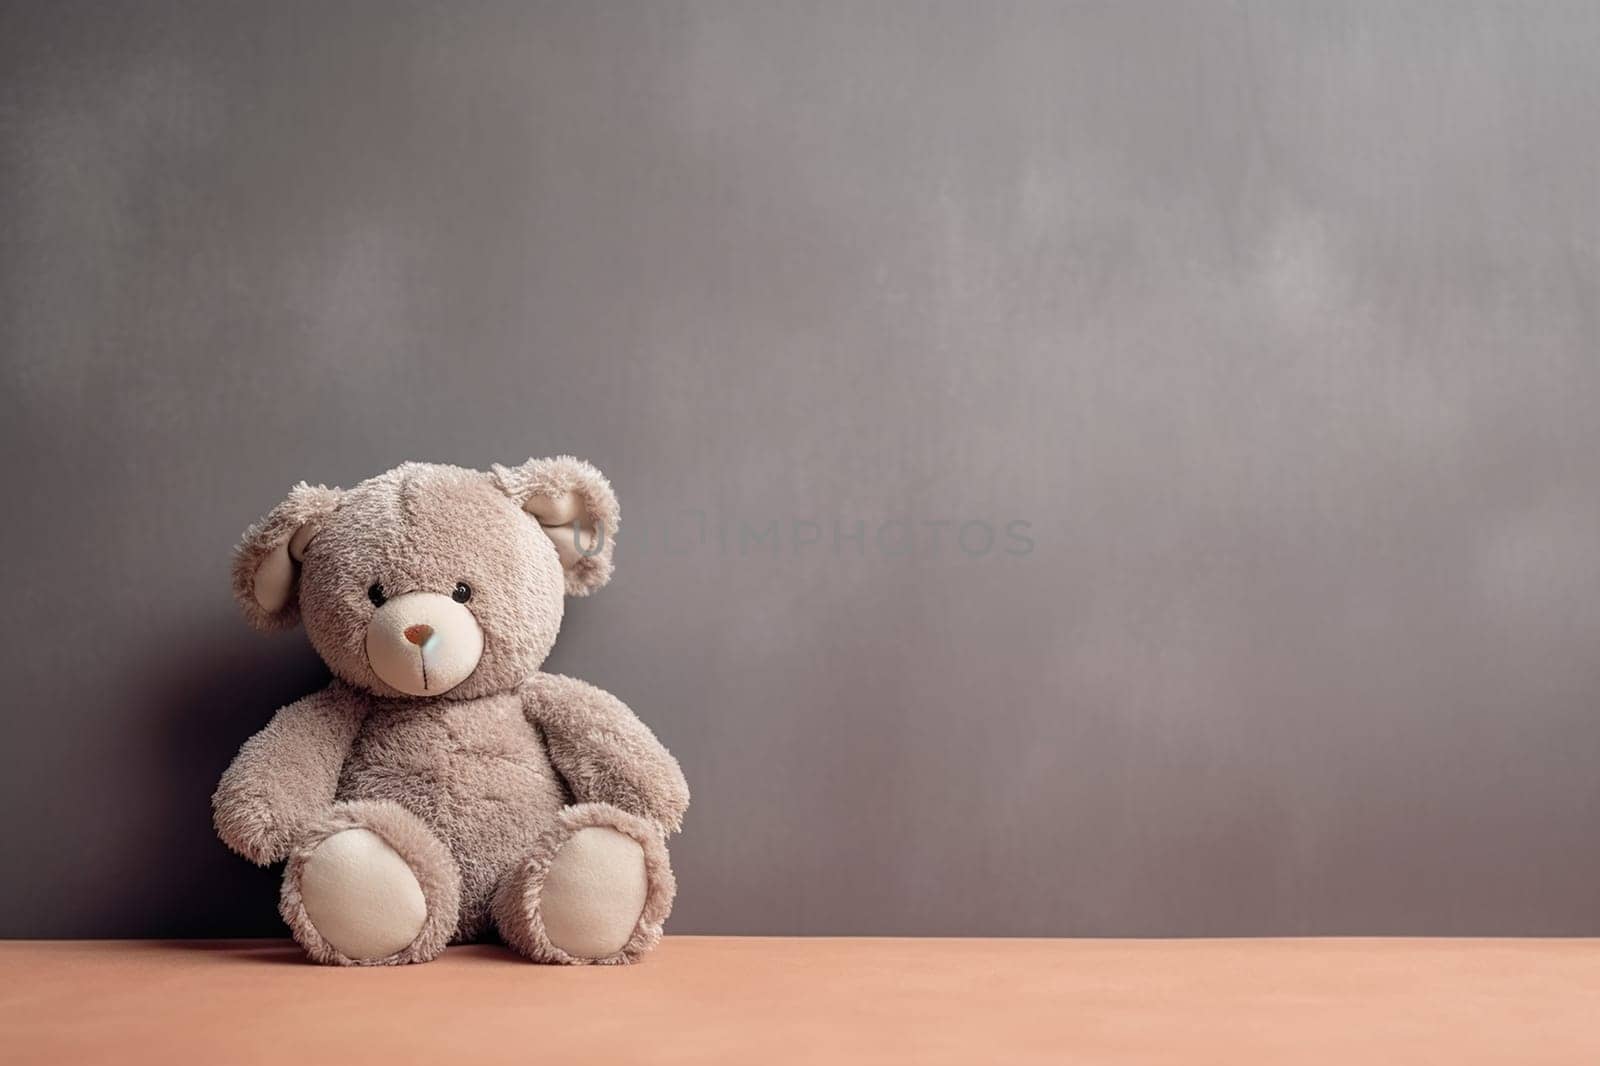 A grey teddy bear sitting on a wooden surface against a plain background by Hype2art